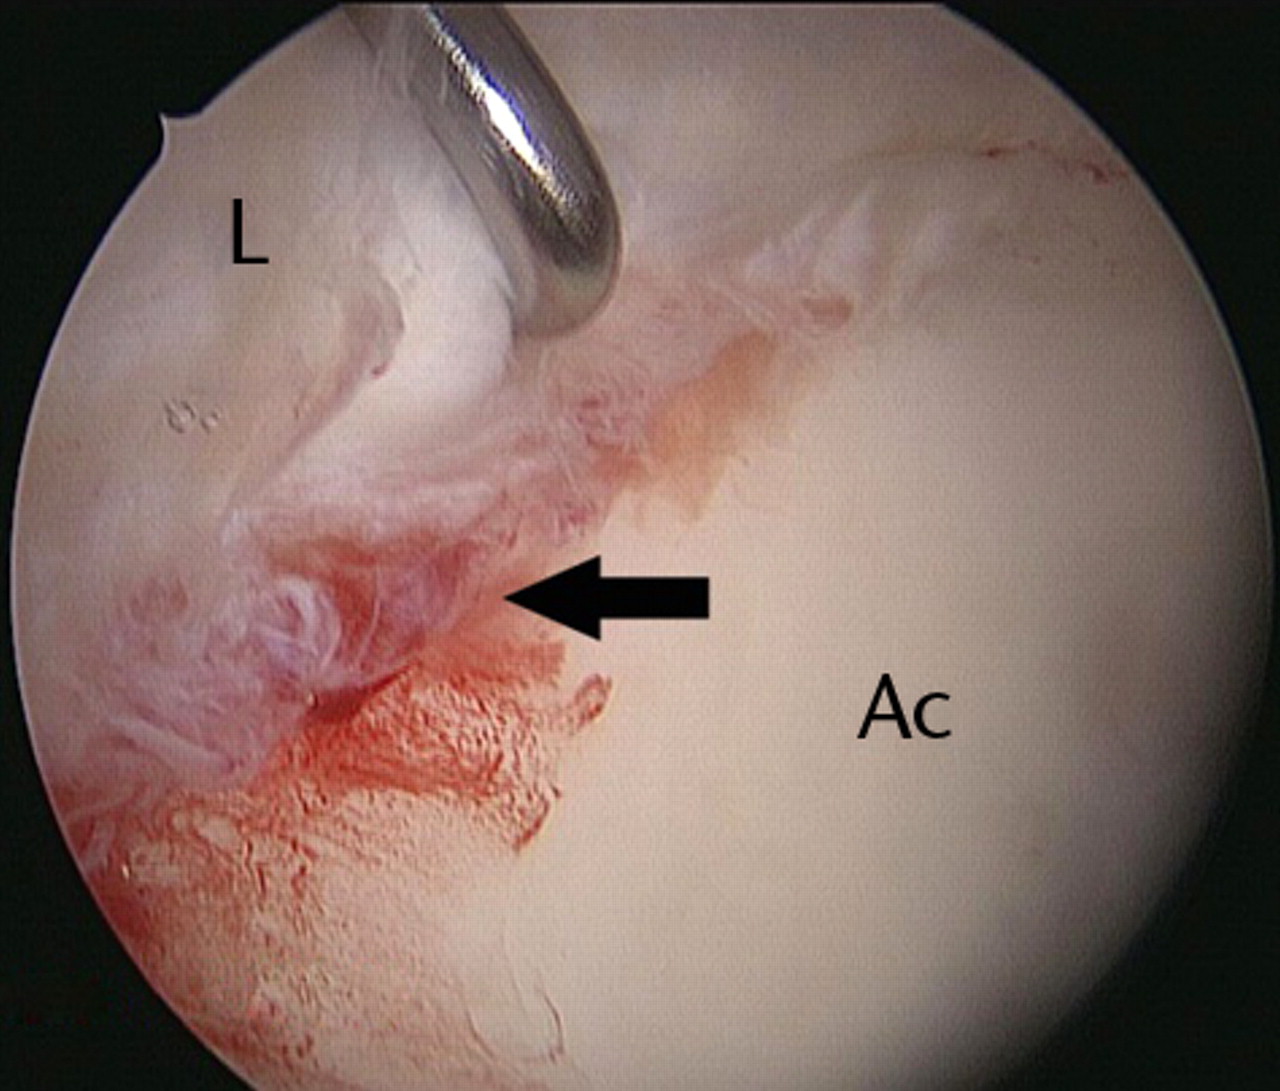 Figs. 2a - 2d 
          Arthroscopic images of the
right hip of a 53-year-old woman with mild dysplasia, showing a)
significant hypertrophy of the anterosuperior labrum, leaving little
room for the 5 mm dilator and guide wire inserted through the anterior
portal, b) the radiofrequency ablation probe just interposed safely
between the labrum and the femoral head, c) partial labral detachment
(arrow), and d) improved visualisation after labral repair with
a suture anchor (arrow) (L, labrum; FH, femoral head; Ac, acetabulum).
        